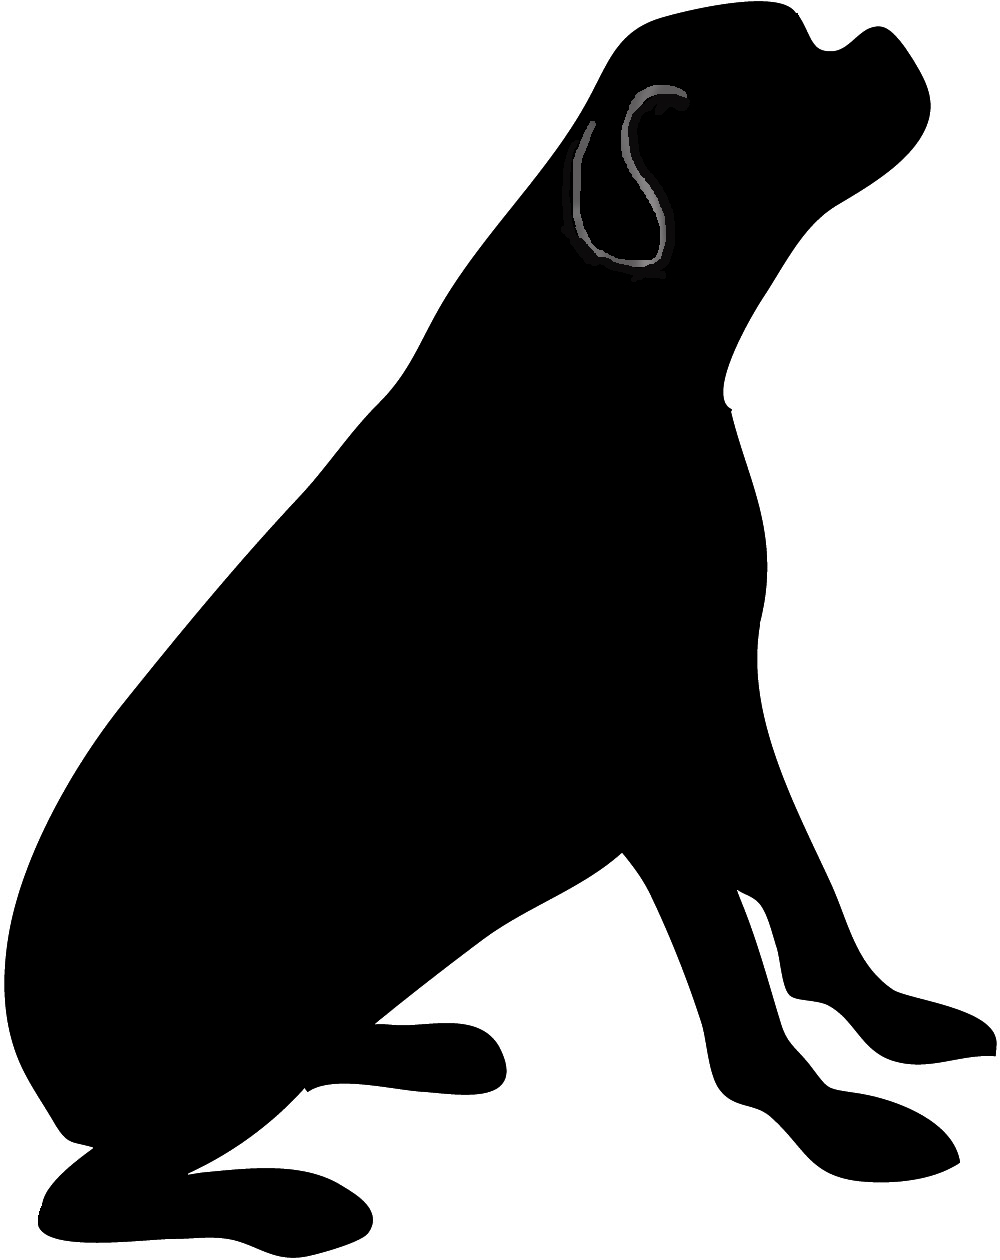 Dog sitting silhouette clipart